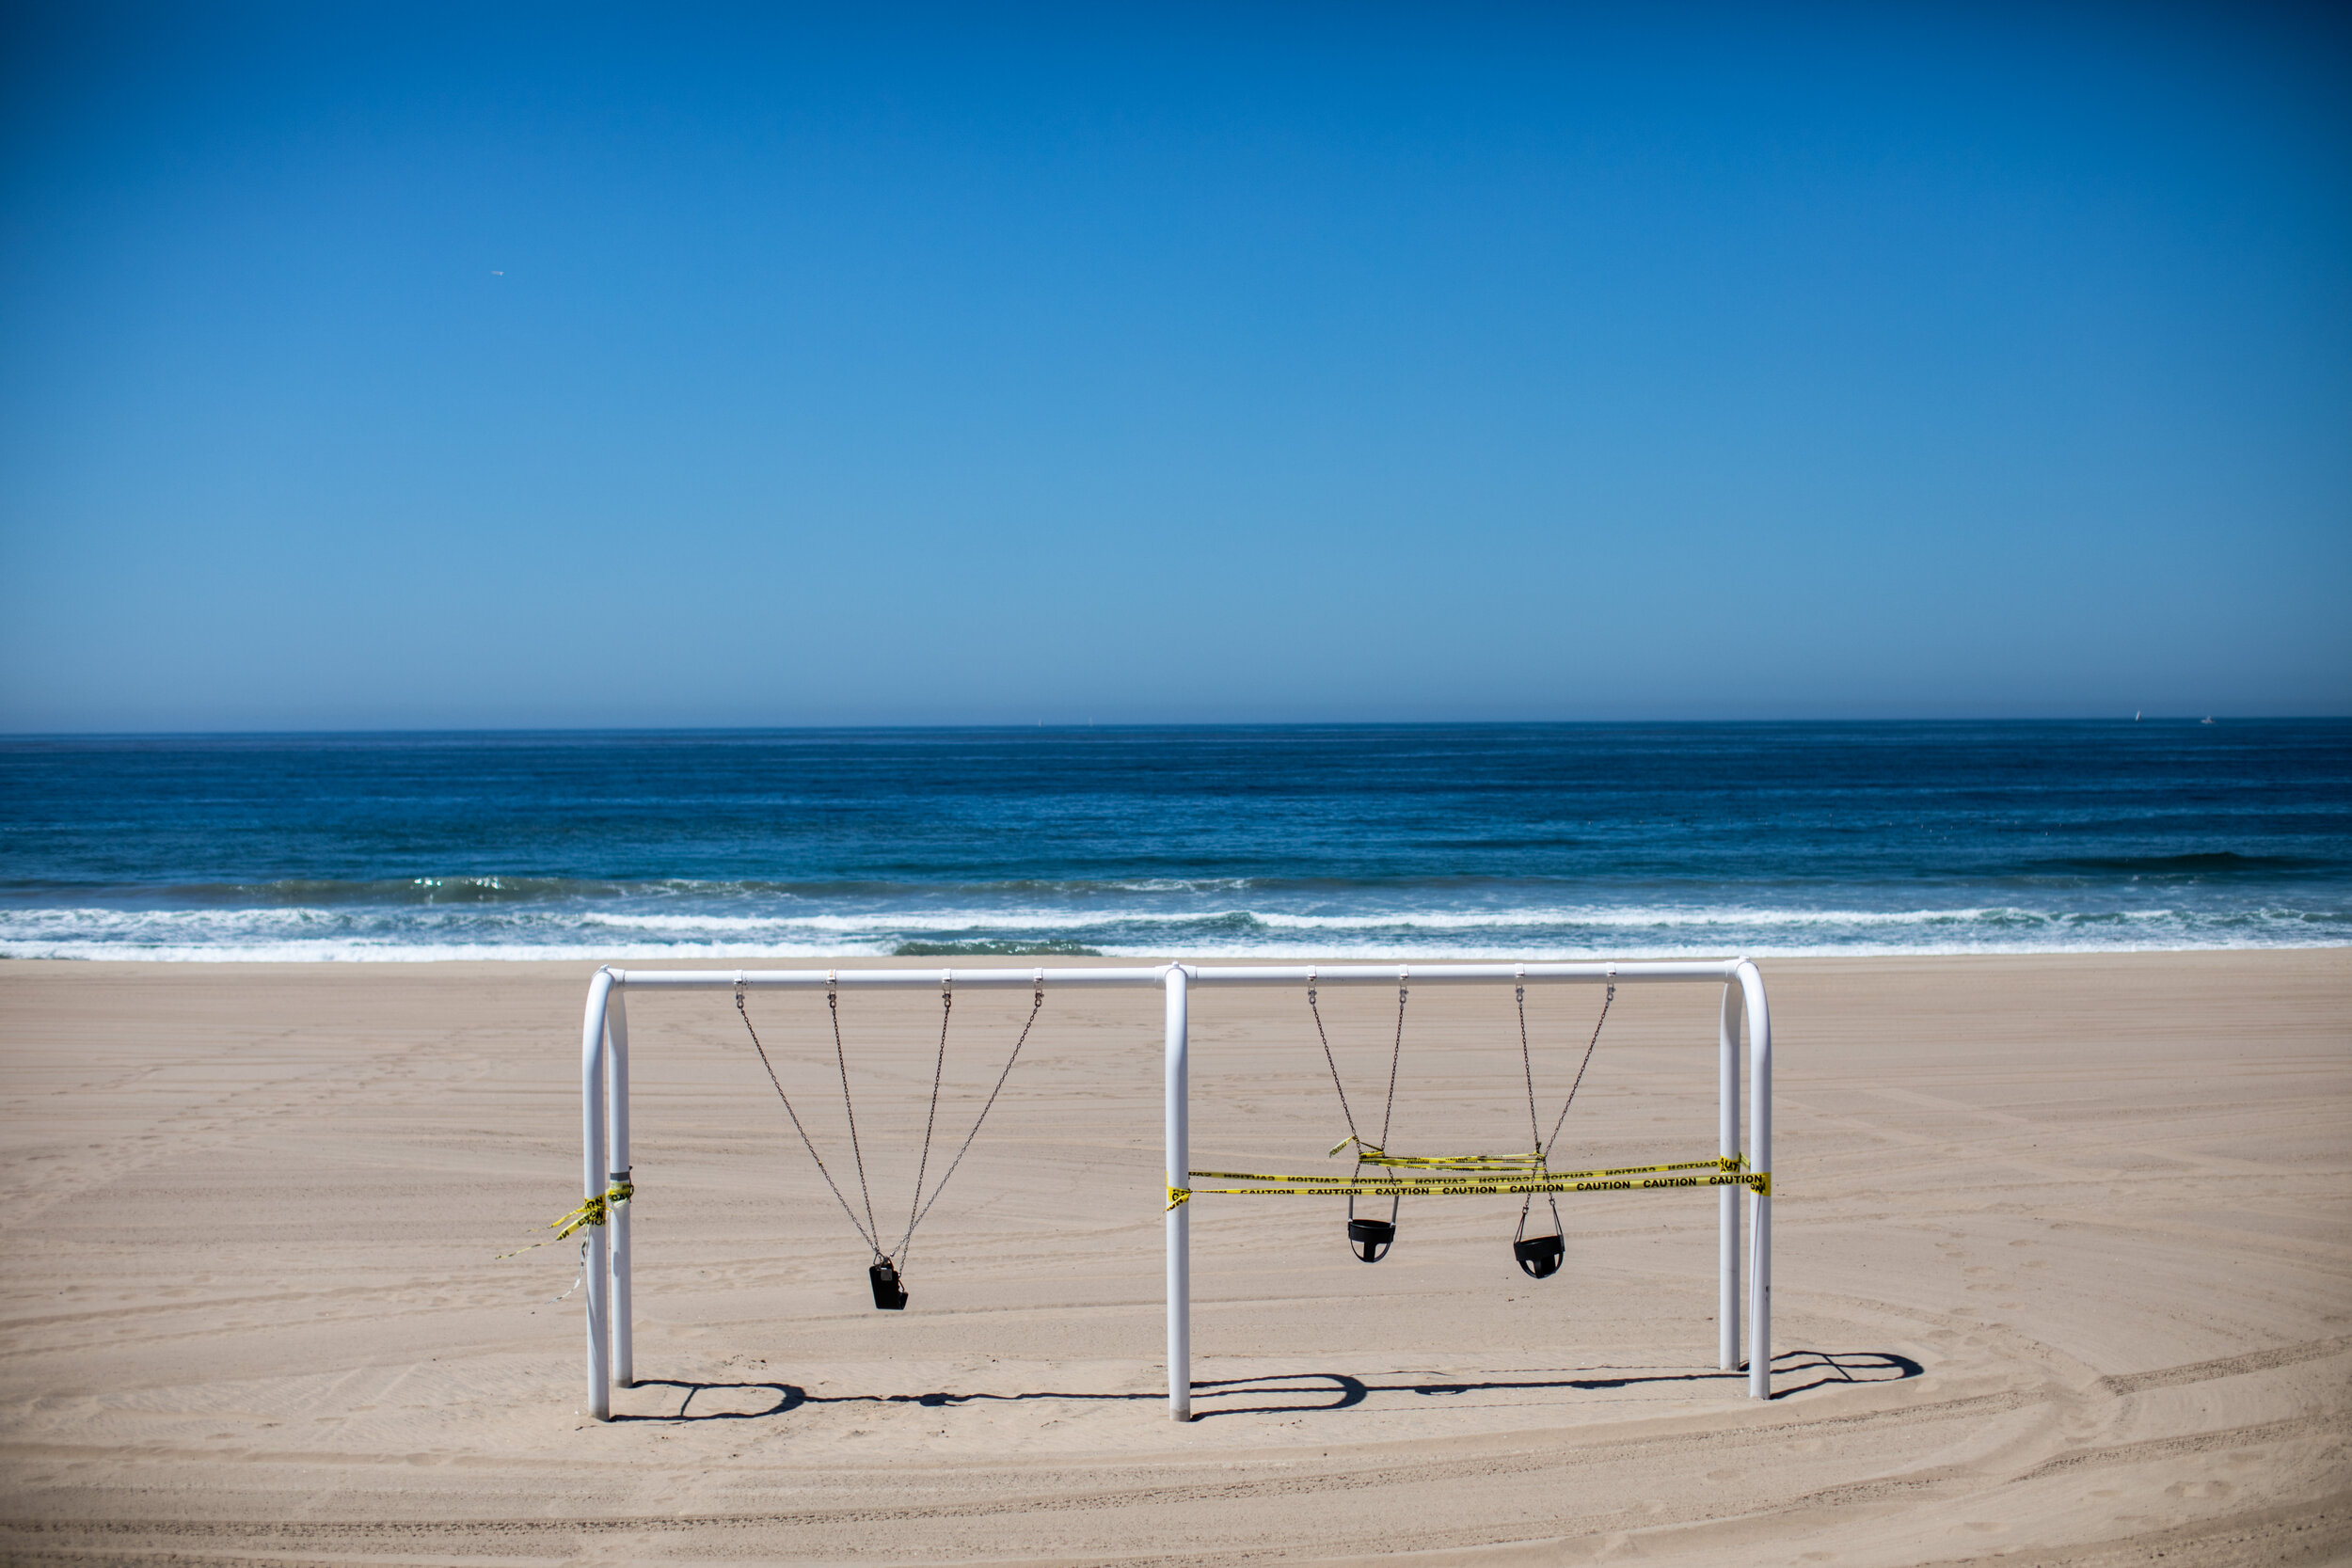  With California’s COVID-19 positive cases rising, stay-at-home orders are kept in place, with playgrounds included in the lock-down. A sign of our civid-times, swings are secured and taped off in Manhattan Beach, CA, during the coronavirus pandemic,